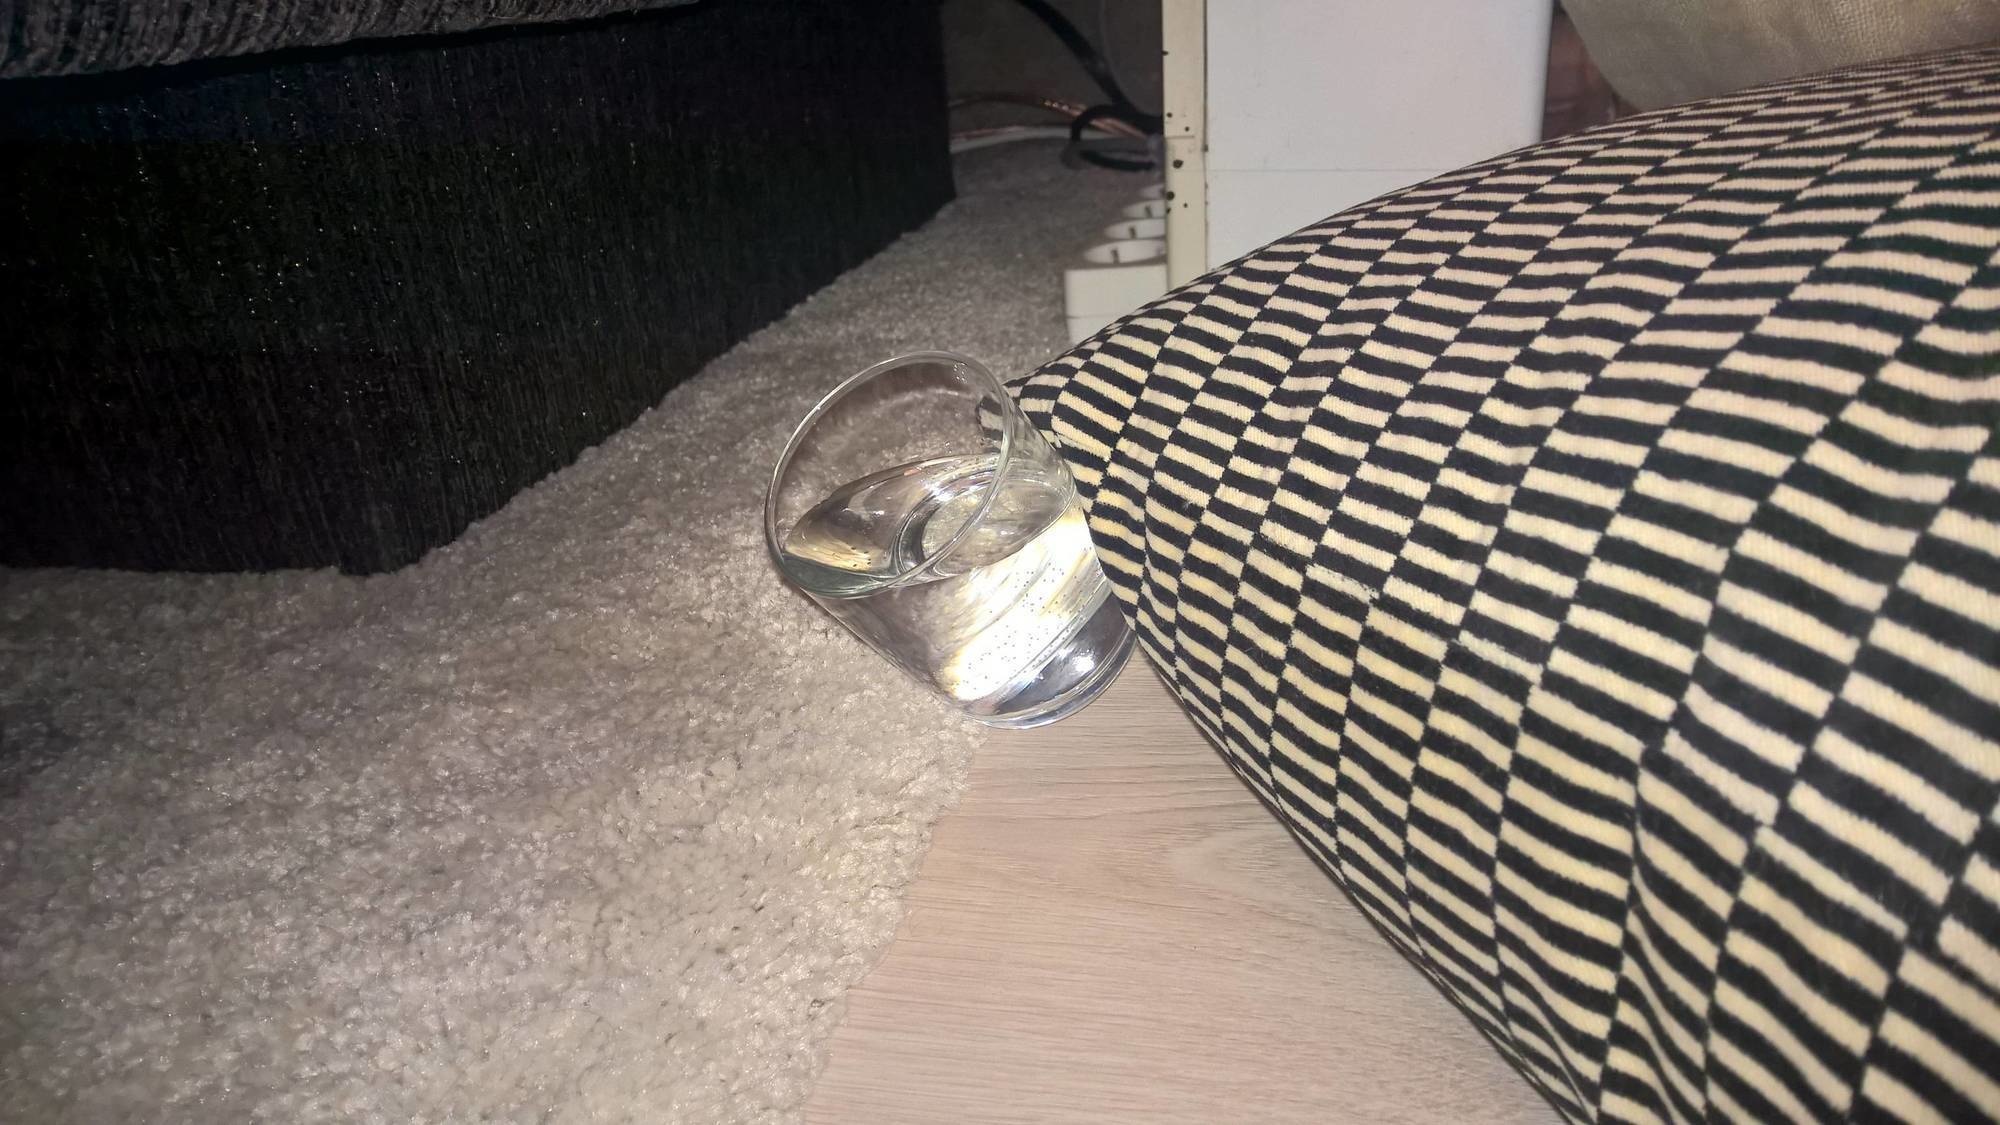 This pillow knocked over a glass of water, but it didn't spill.